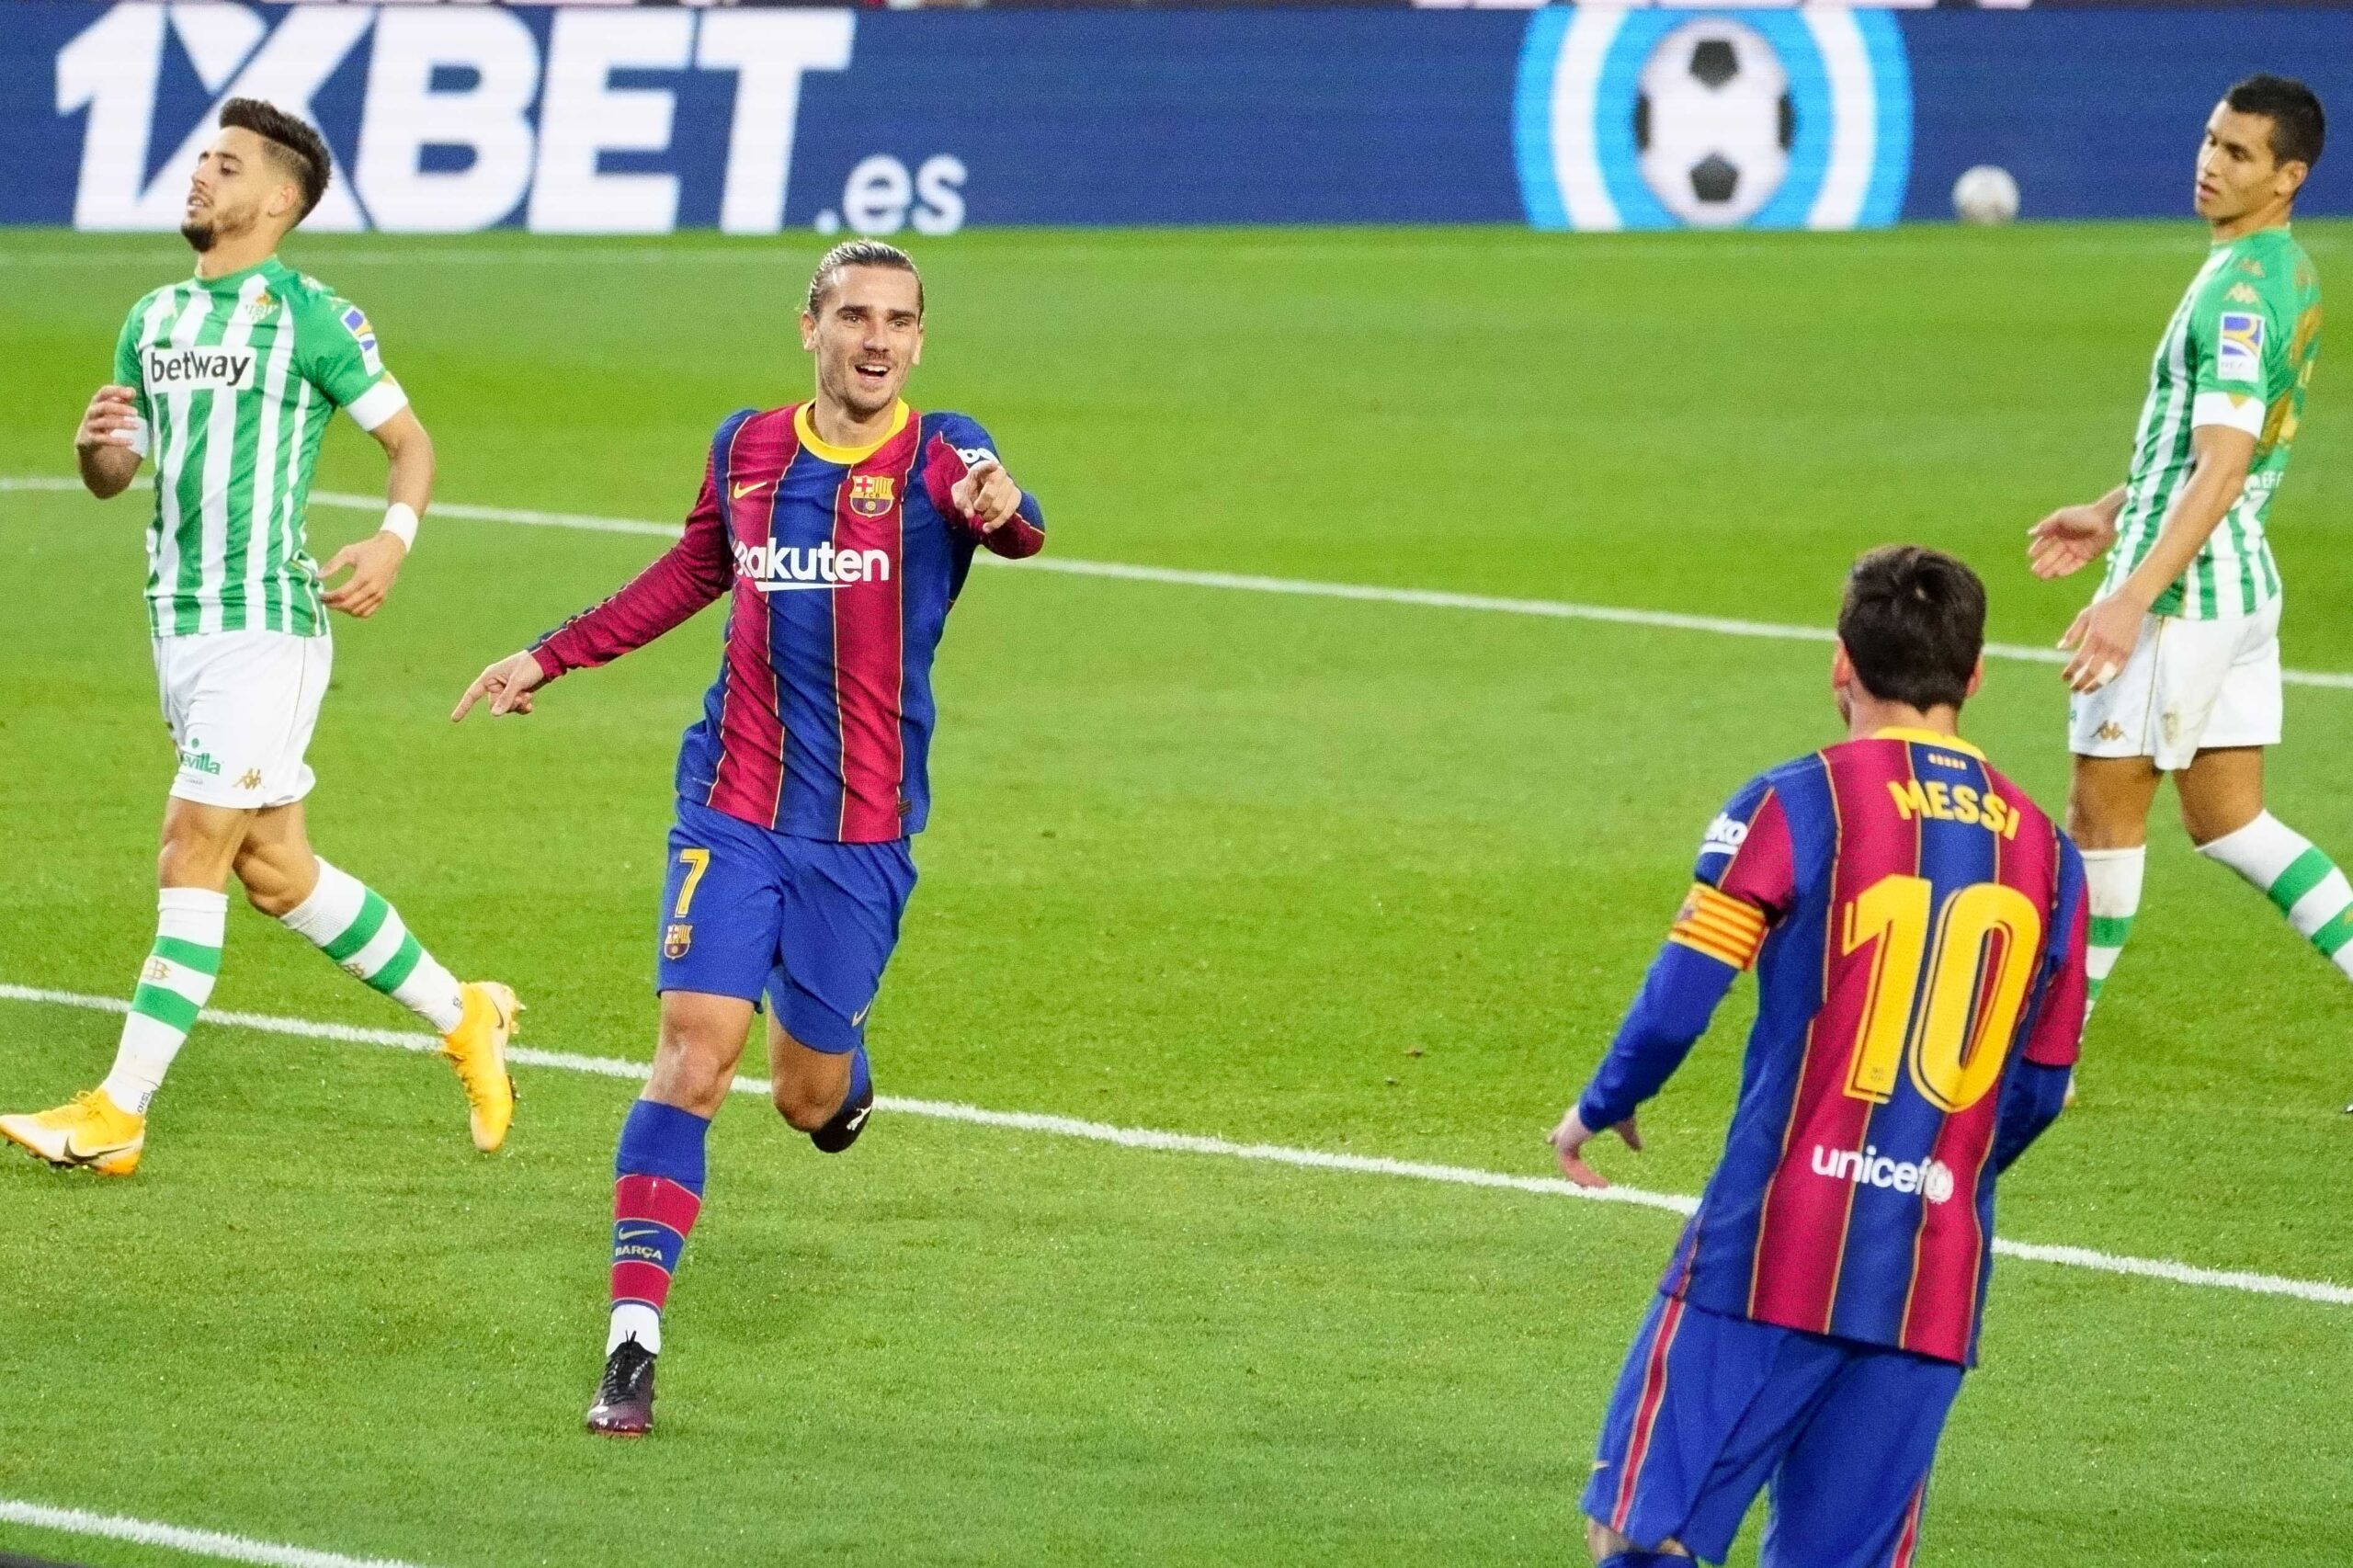 Antoine_Griezmann_and_Leo_Messi_FC_Barcelona_bd11f12a63